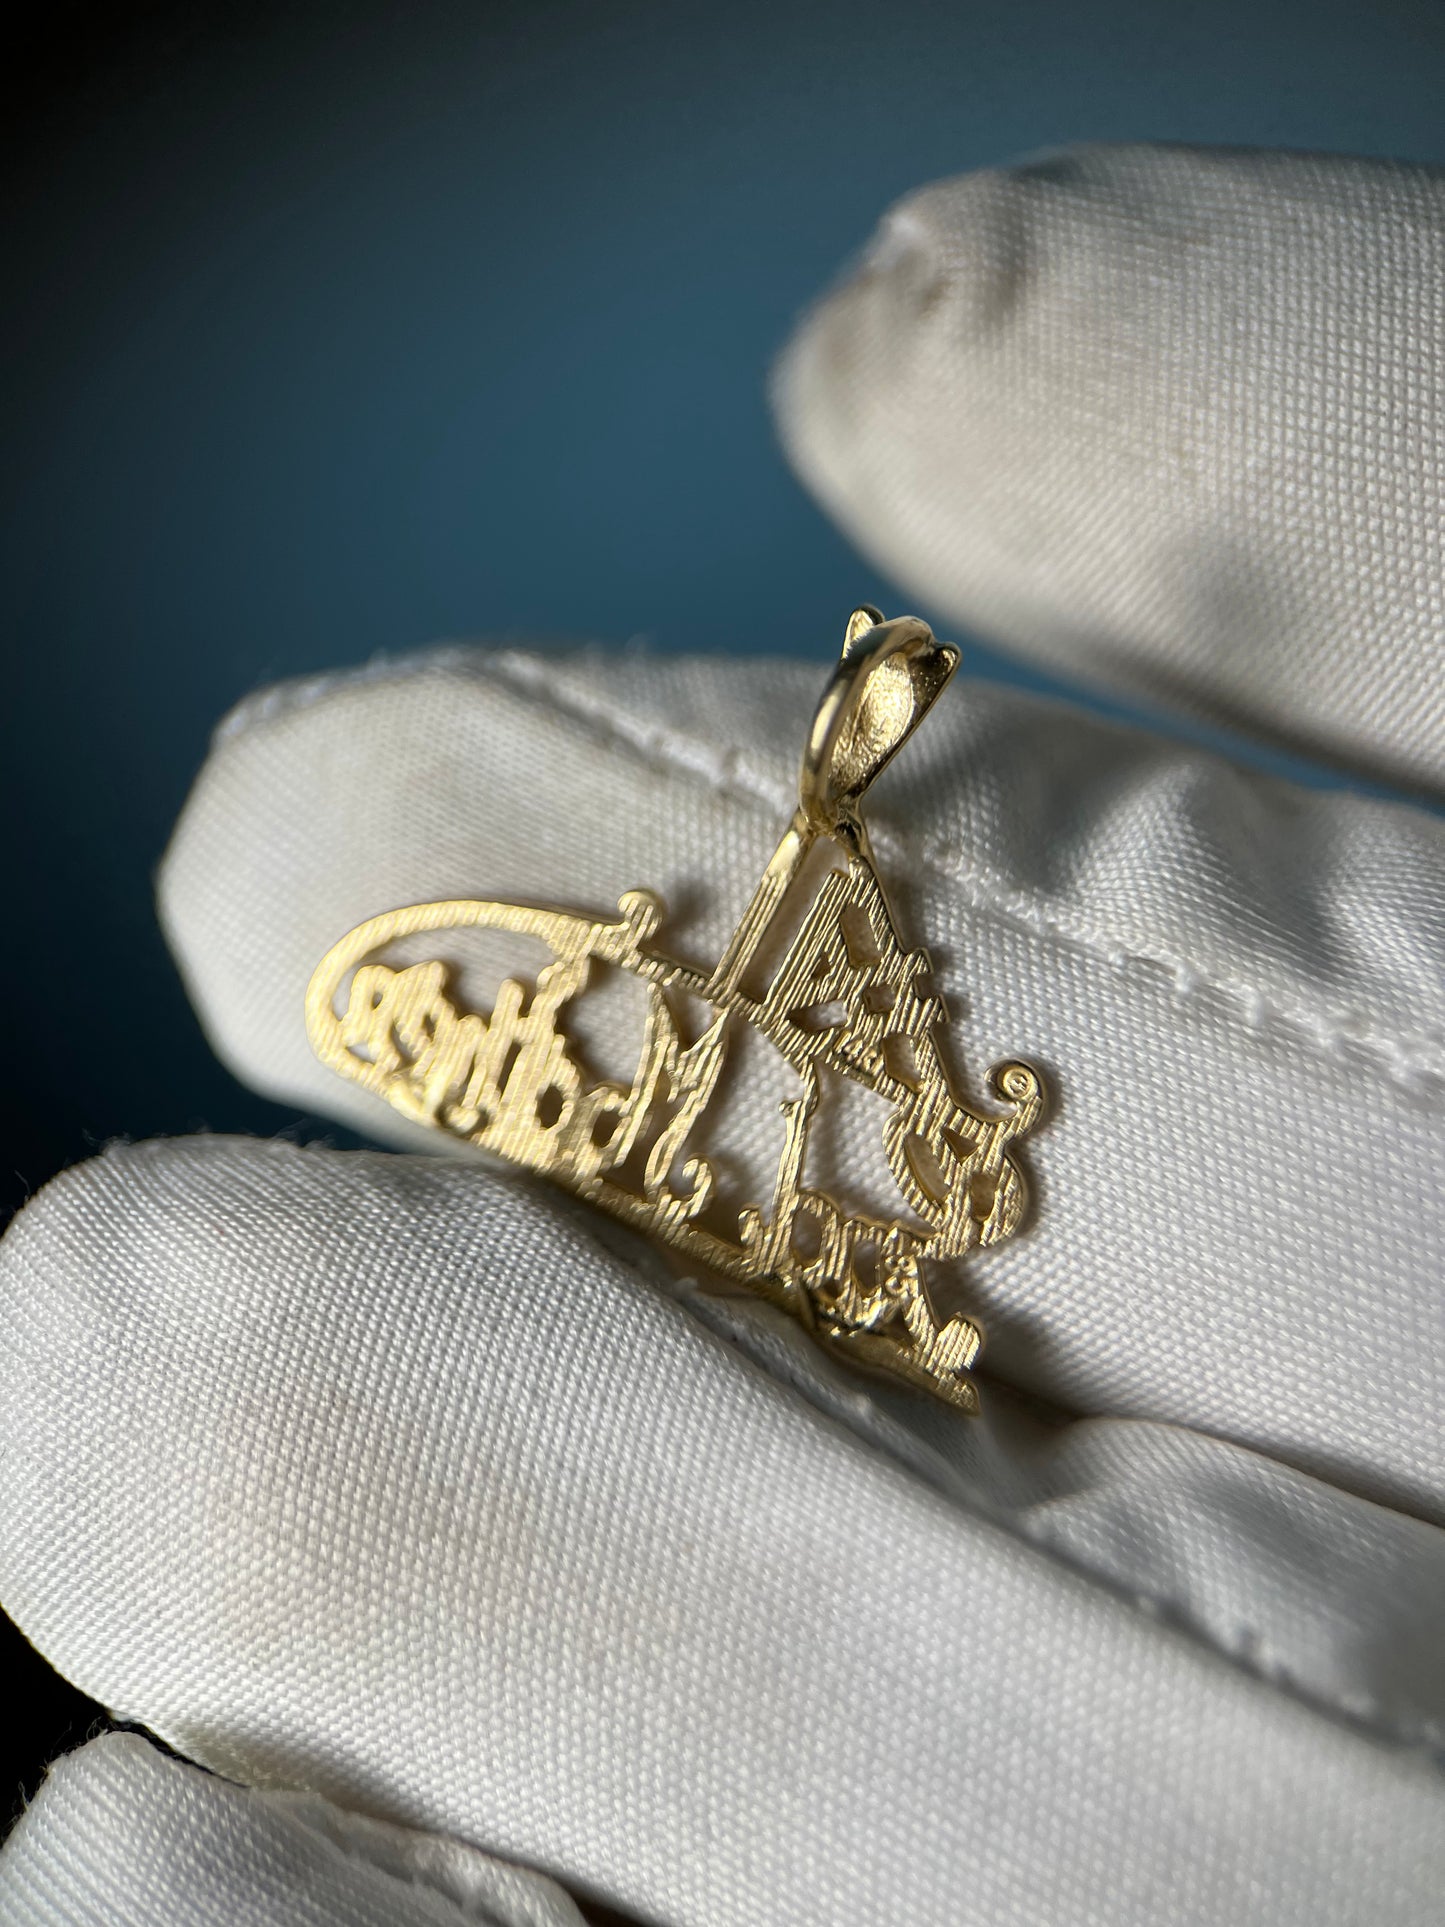 #1 God Mother Pendant in 14k Yellow Gold